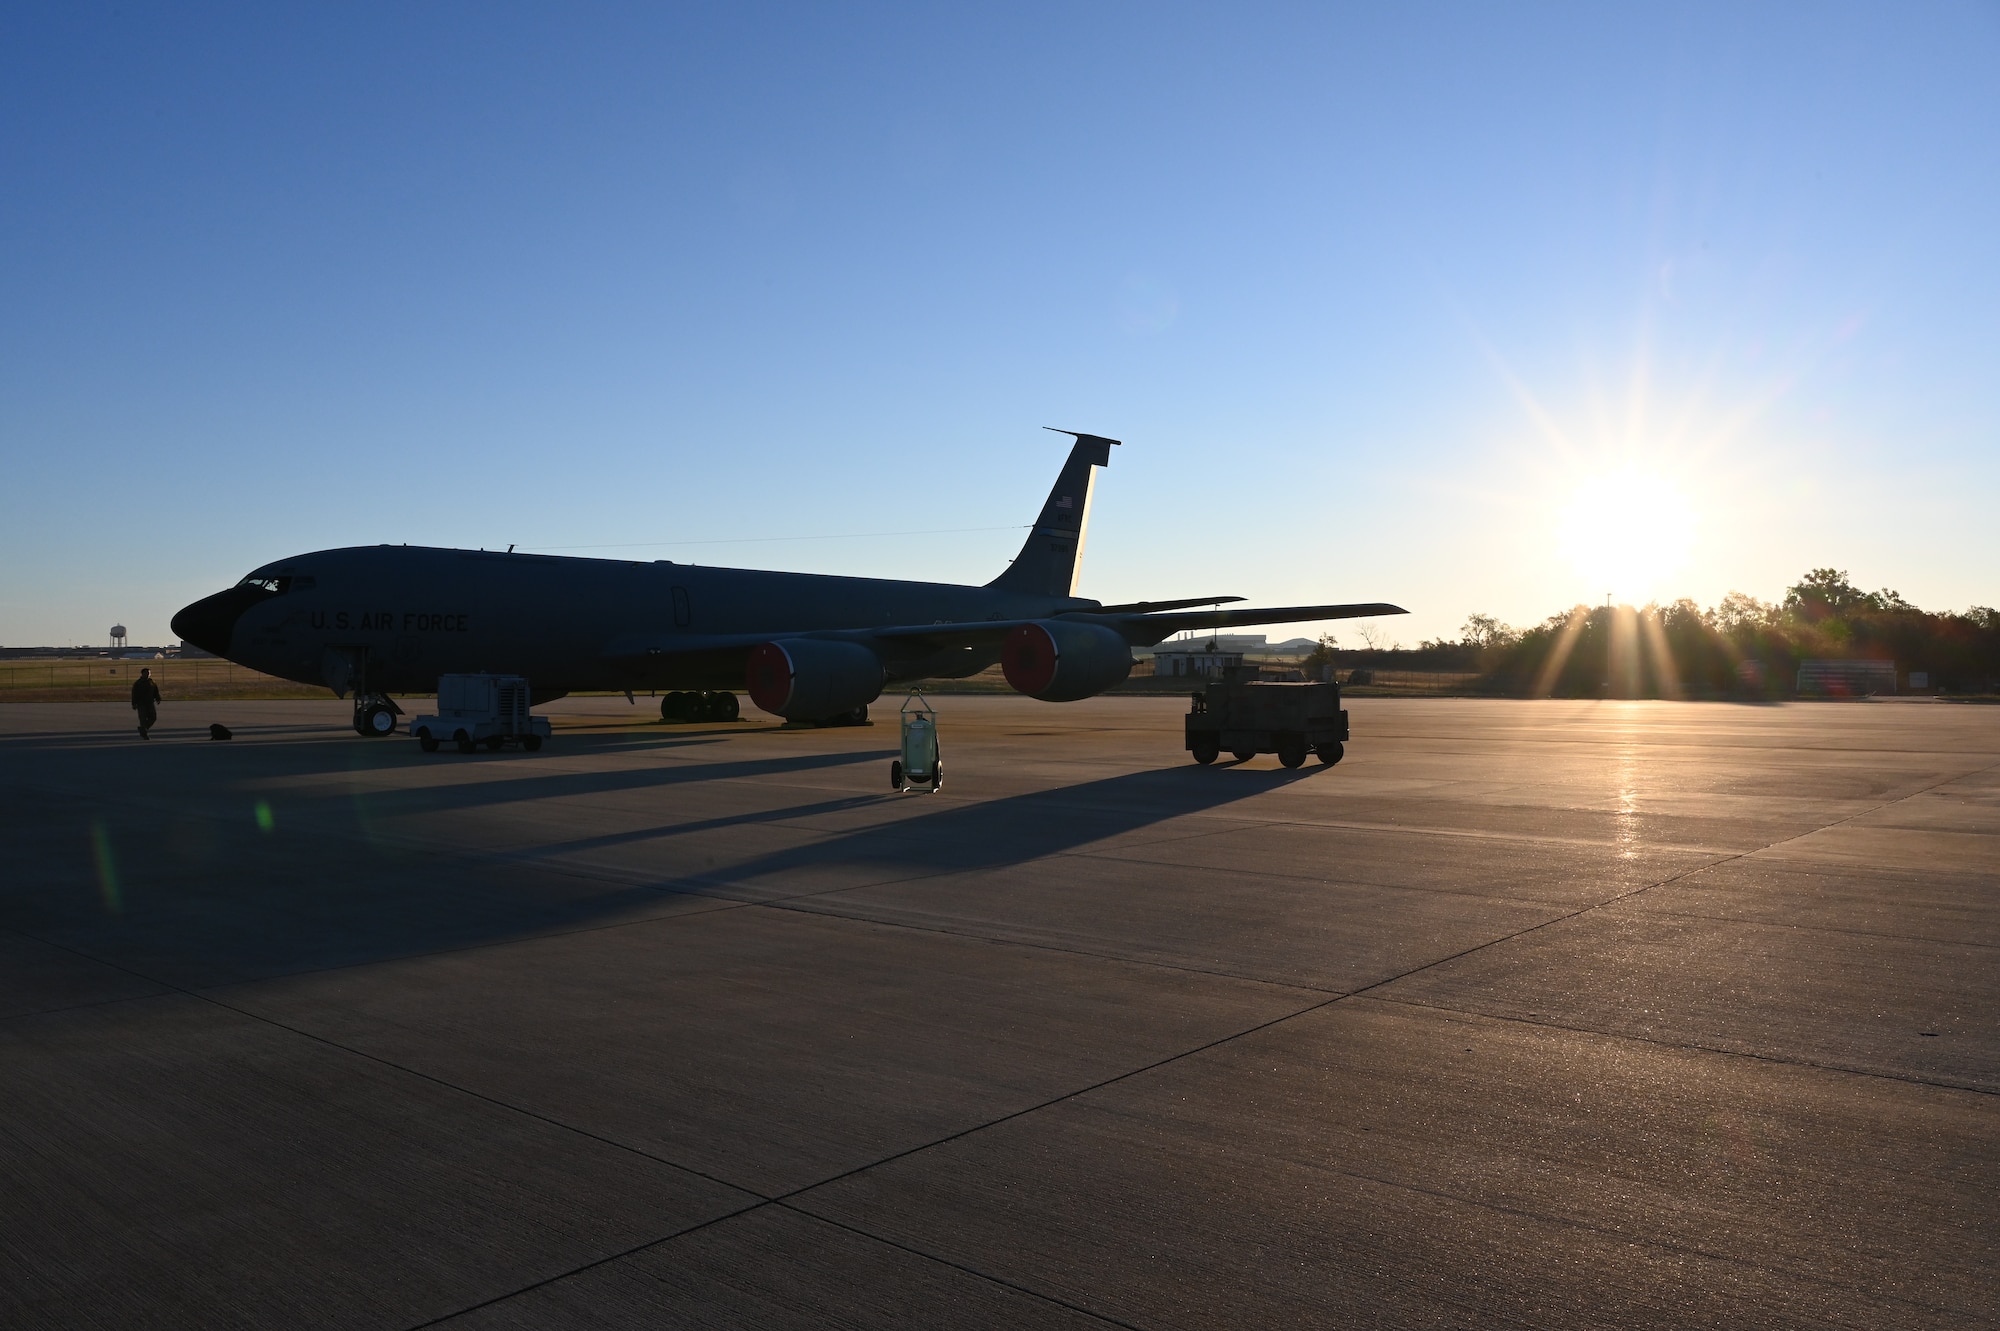 A KC-135 Stratotanker sits on the ramp being inspected during the Global Thunder exercise, Nov. 7, 2021, on Tinker Air Force Base, Oklahoma. Global Thunder is a is a U.S. Strategic Command annual nuclear command and control and field training exercise. (U.S. Air Force photo by Master Sgt. Grady Epperly)